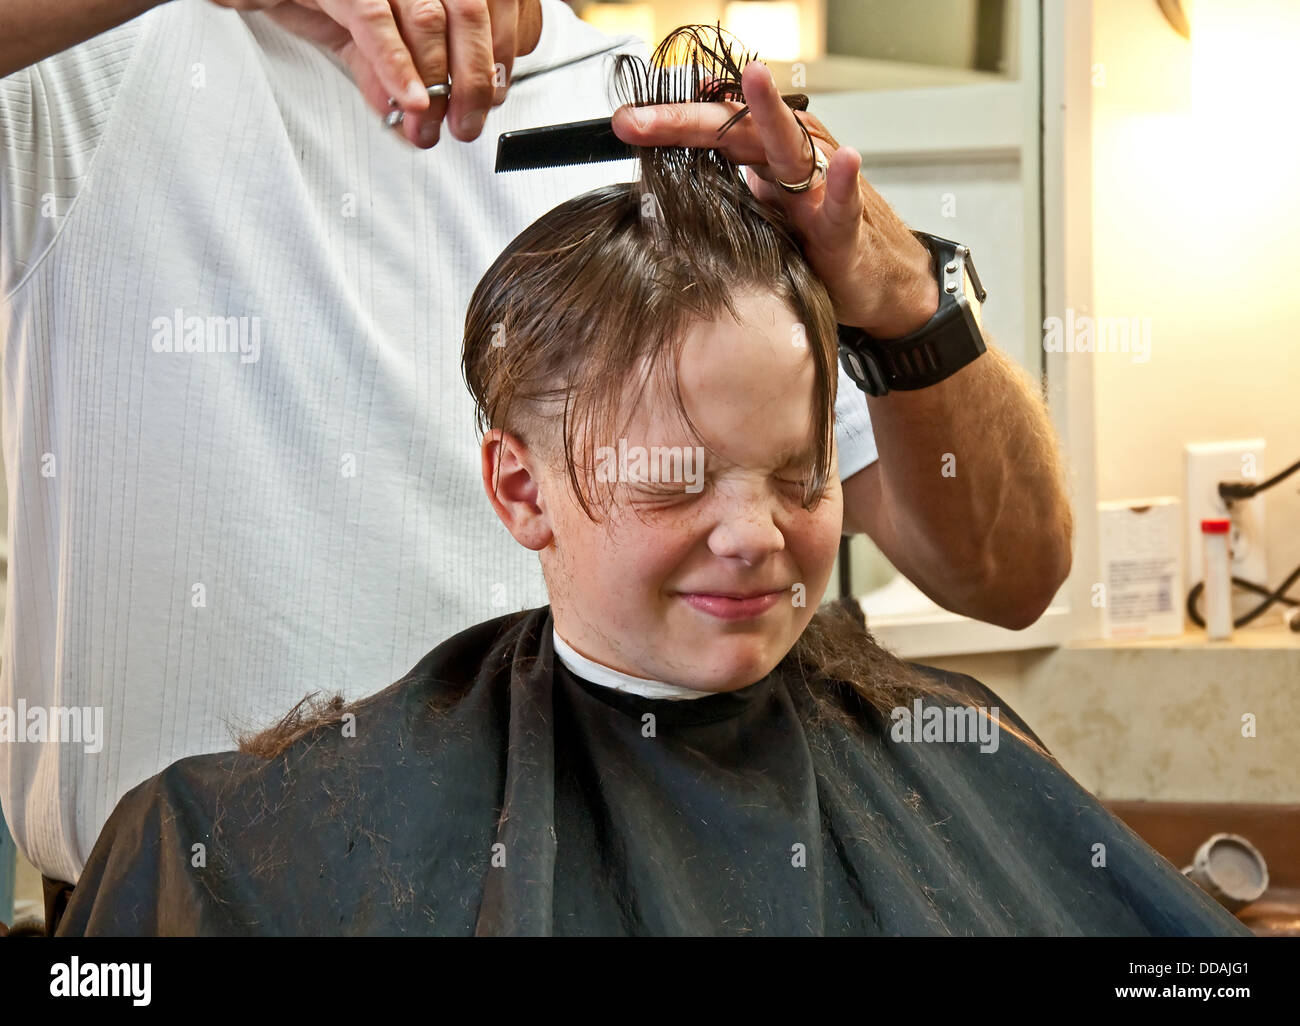 this 9 year old caucasian boy is getting his hair cut from